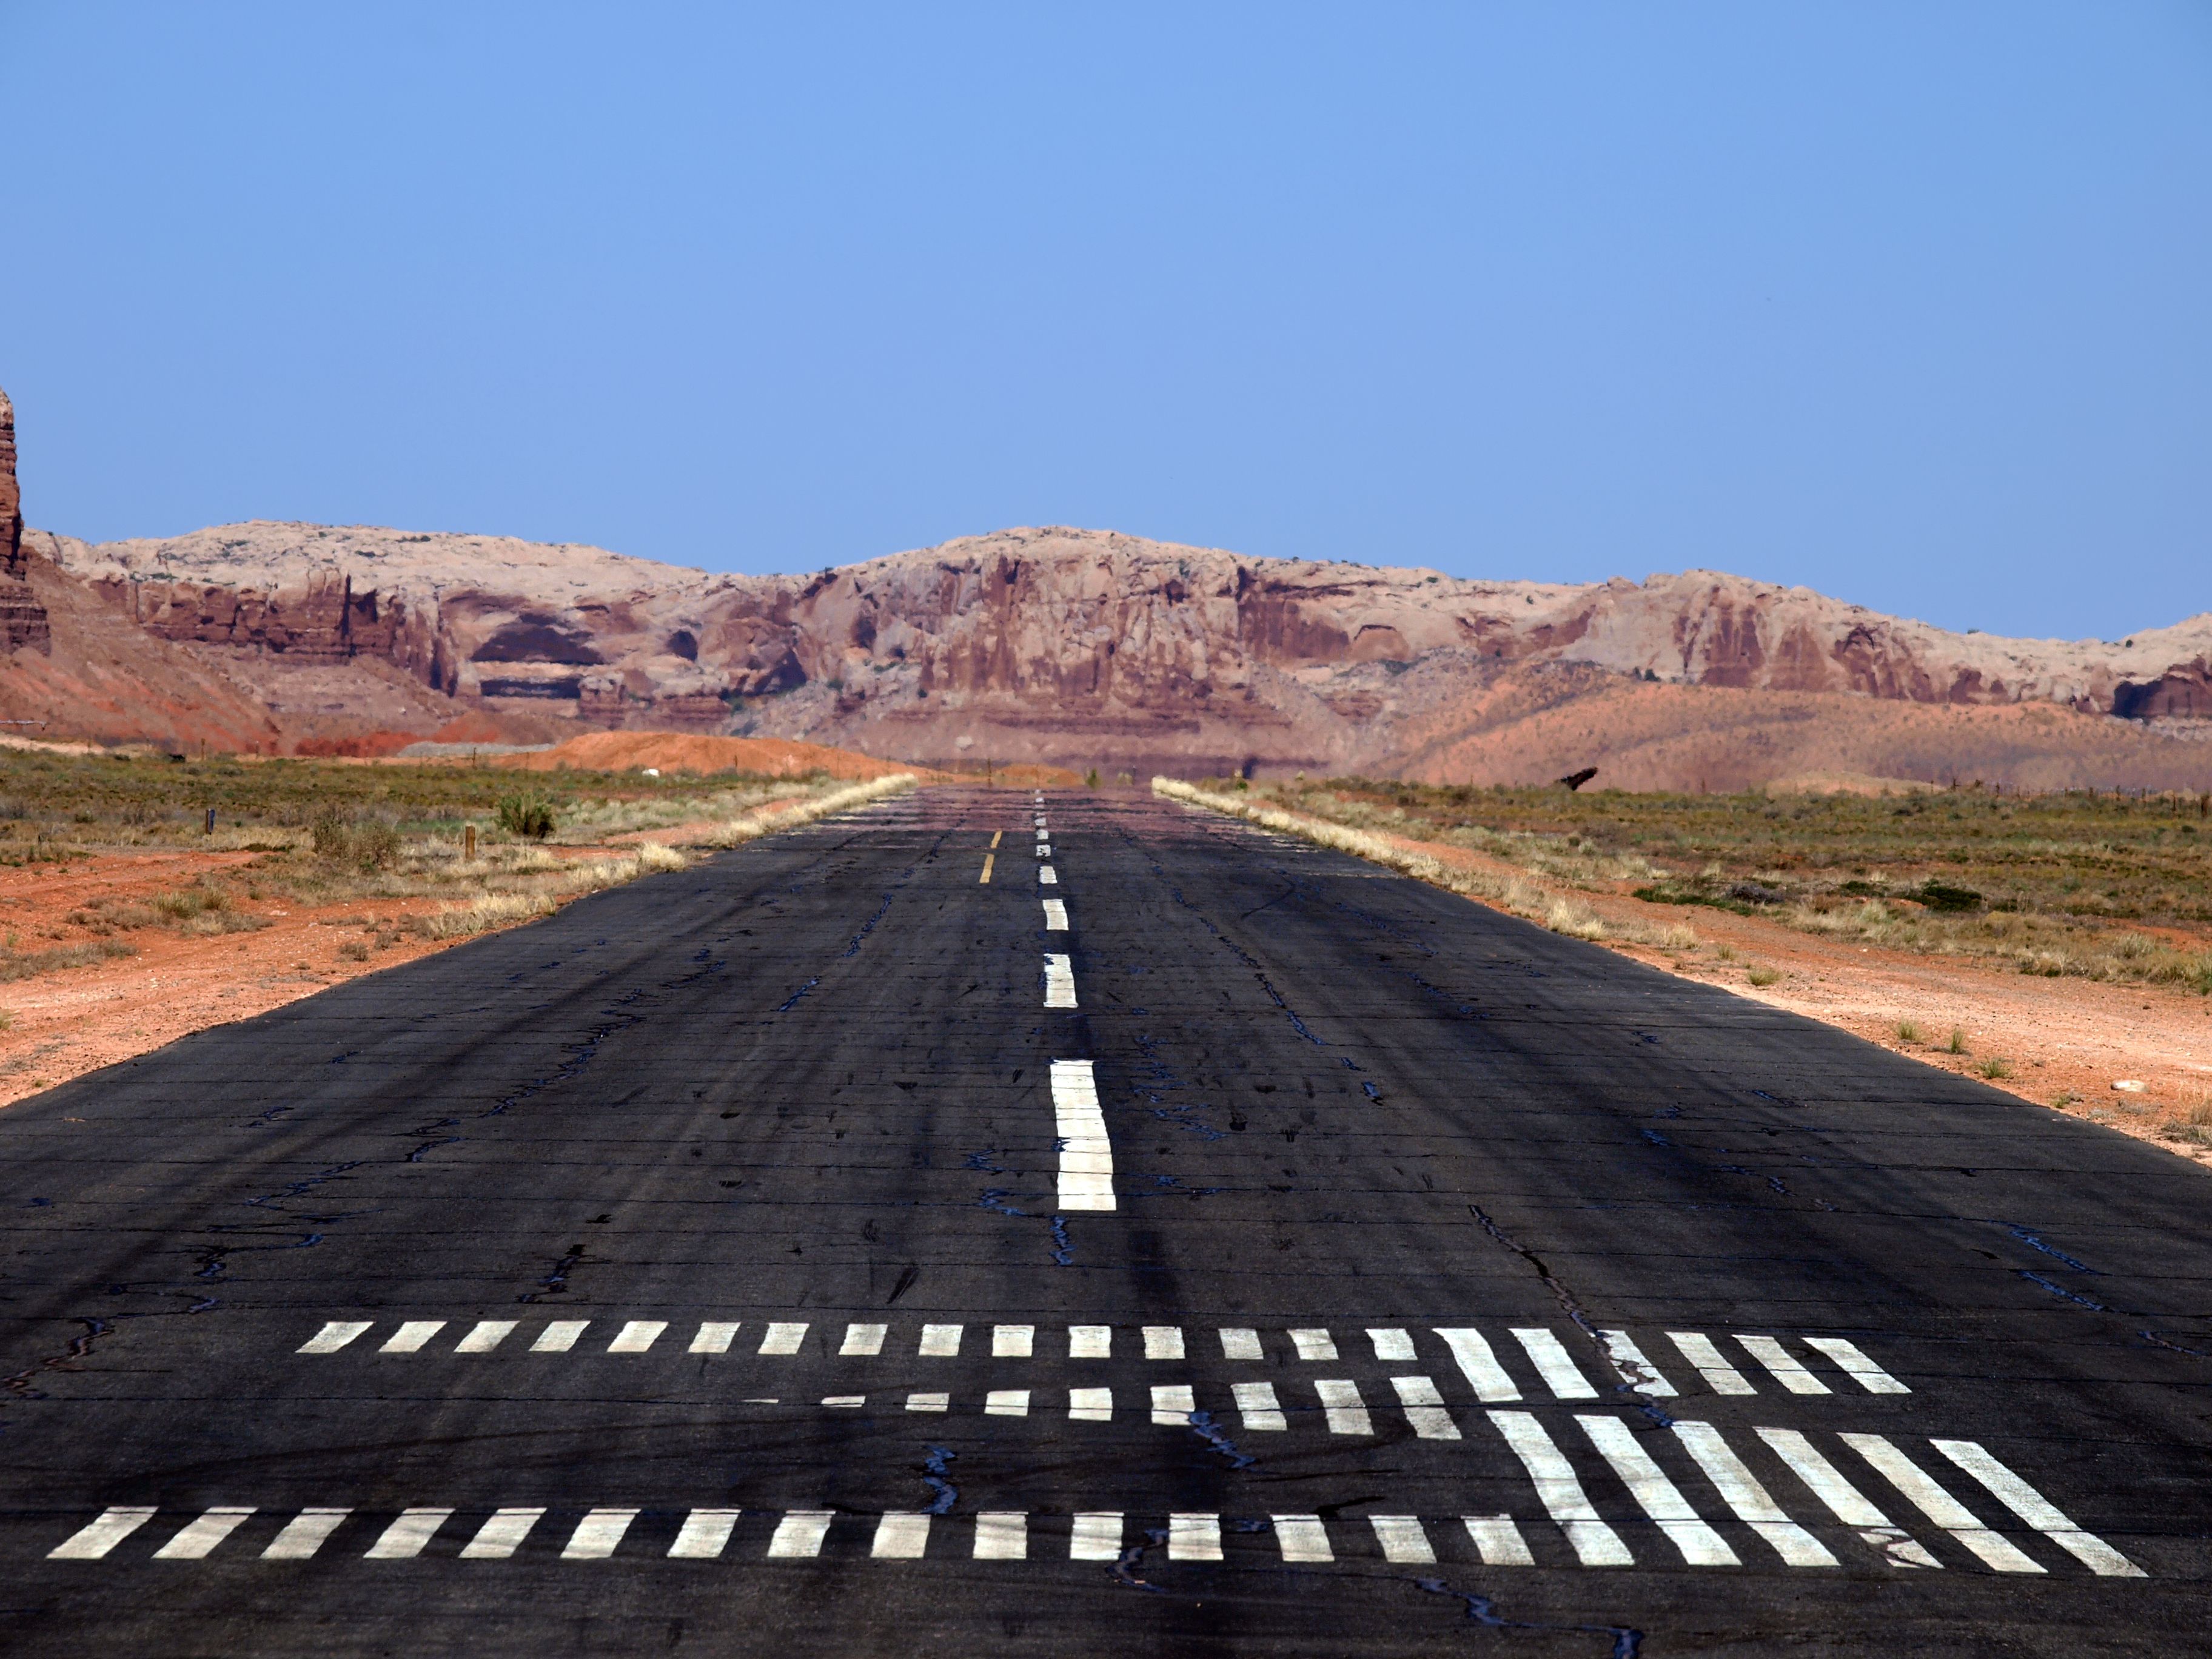 Heat visibly rising off a runway in a desert.